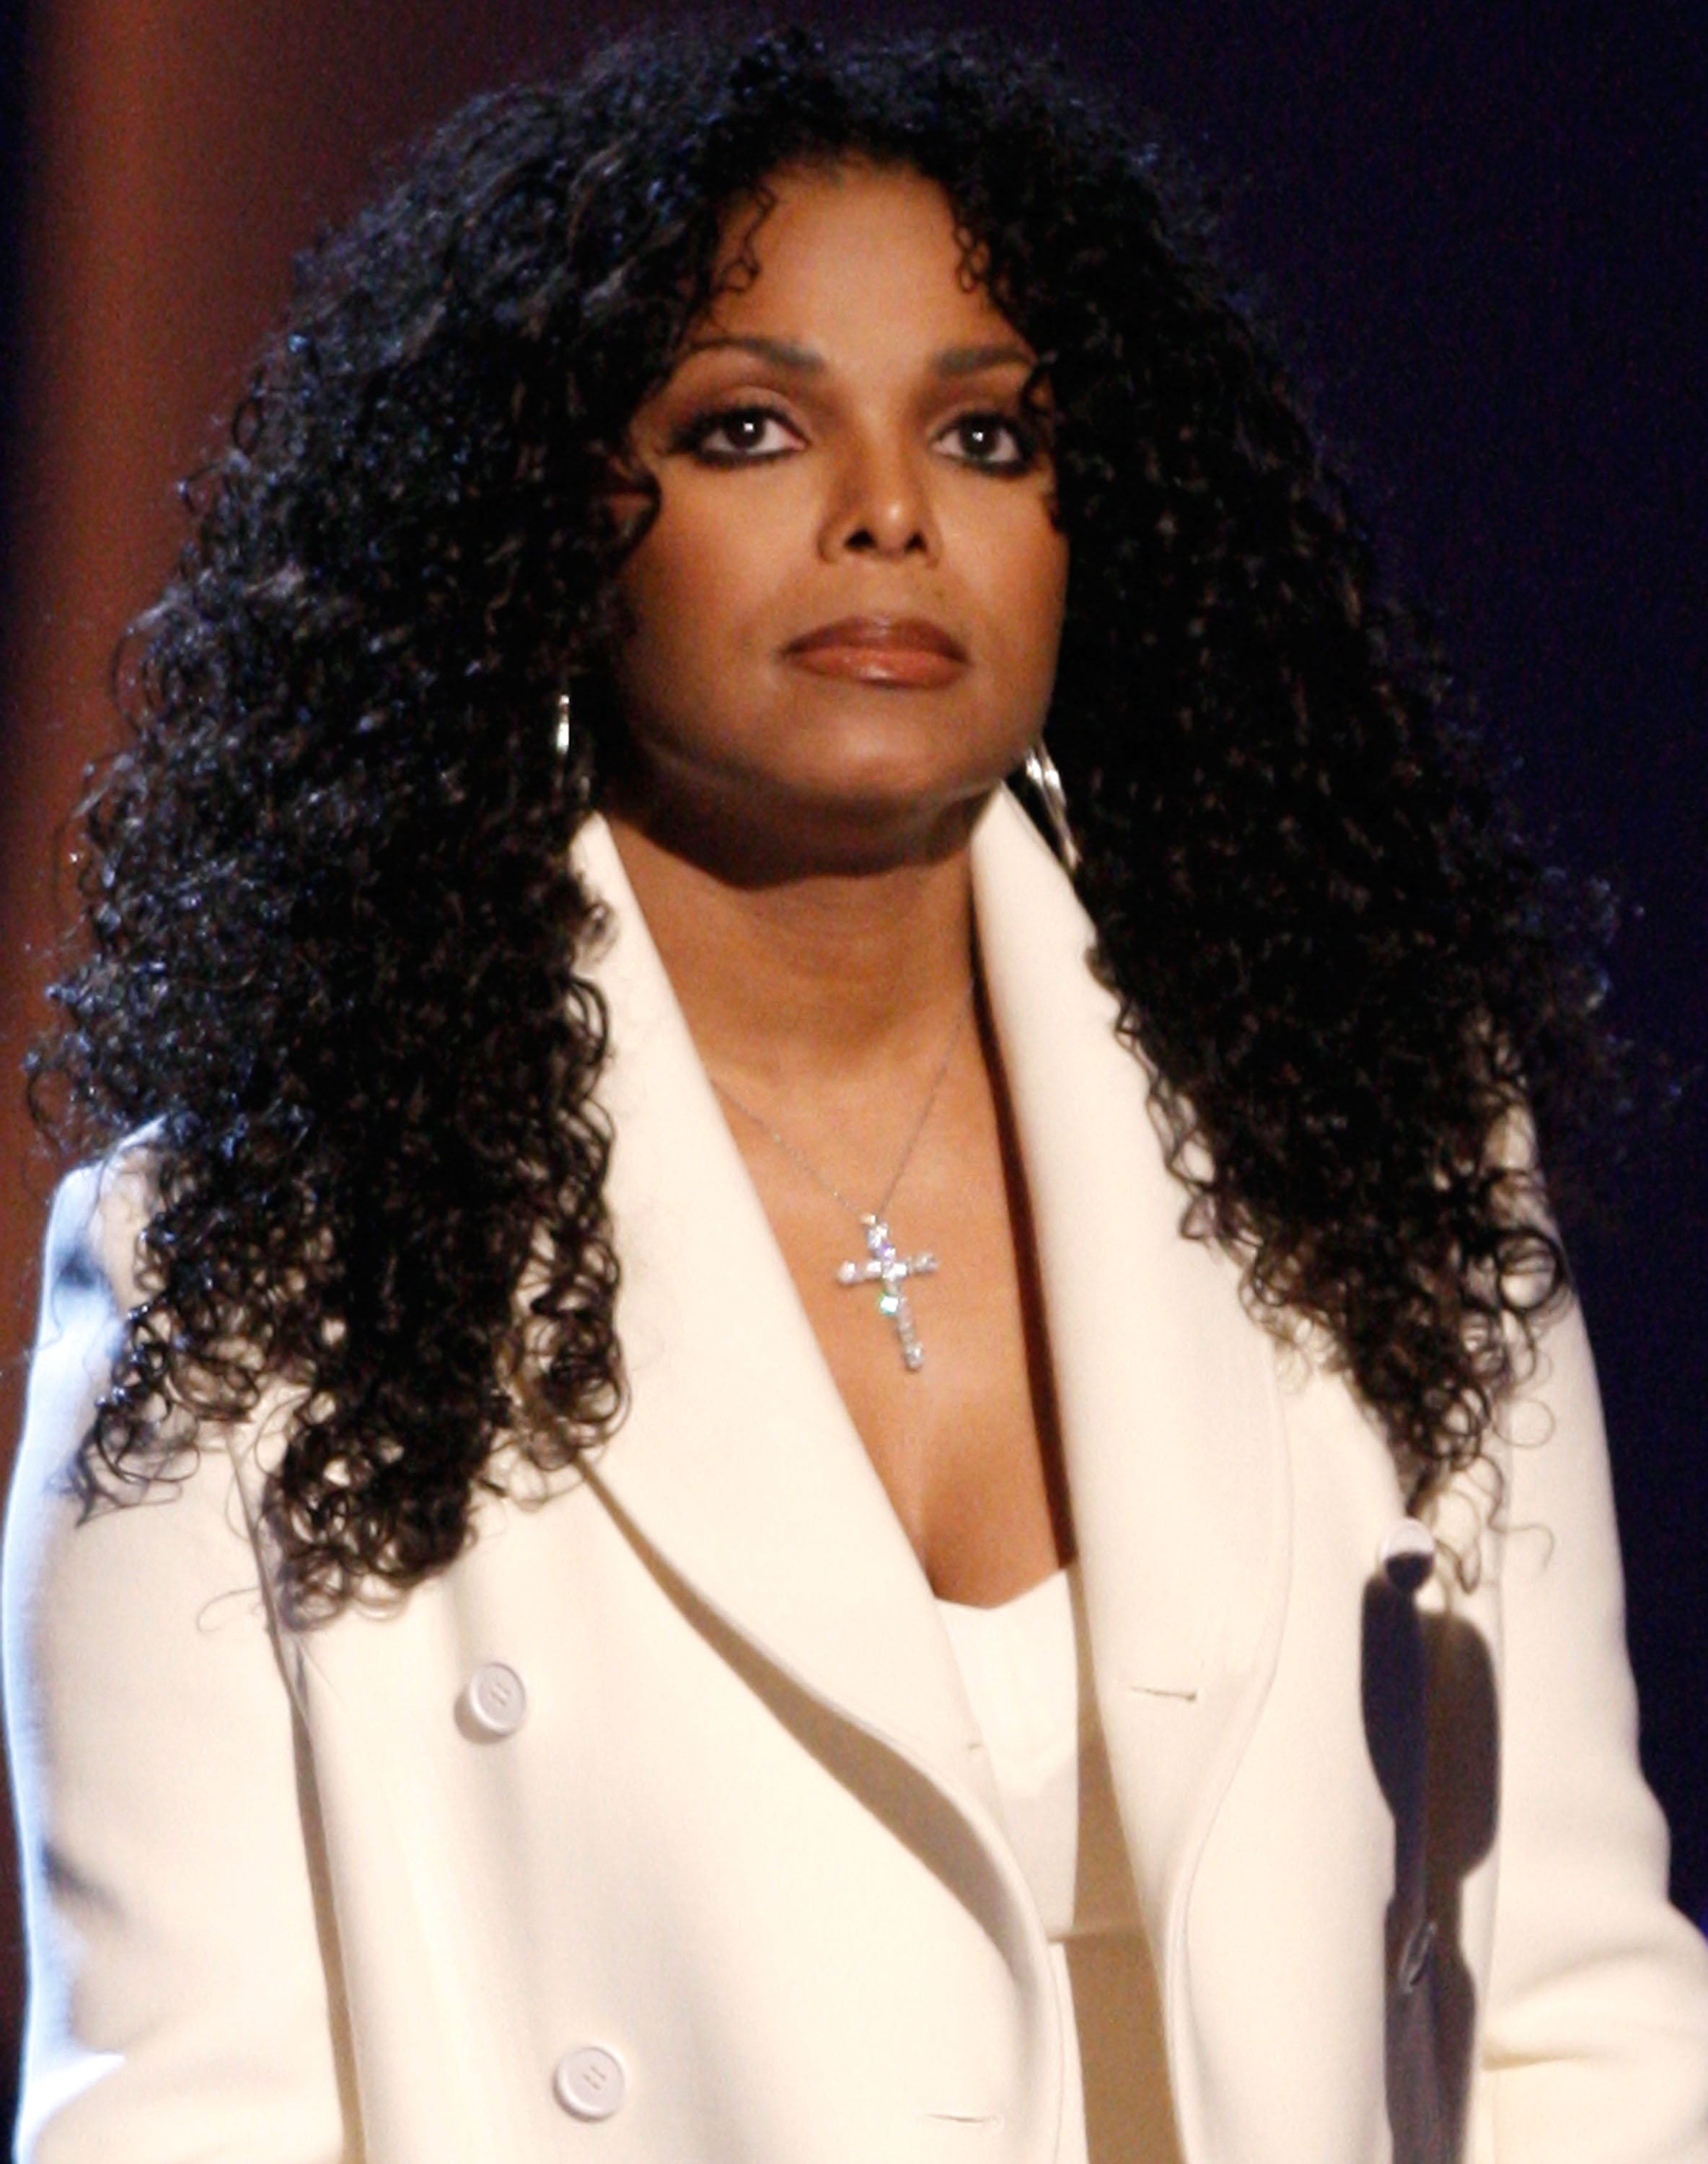 Janet Jackson at the 2009 BET Awards, 2009 in Los Angeles, California | Source: Getty Images